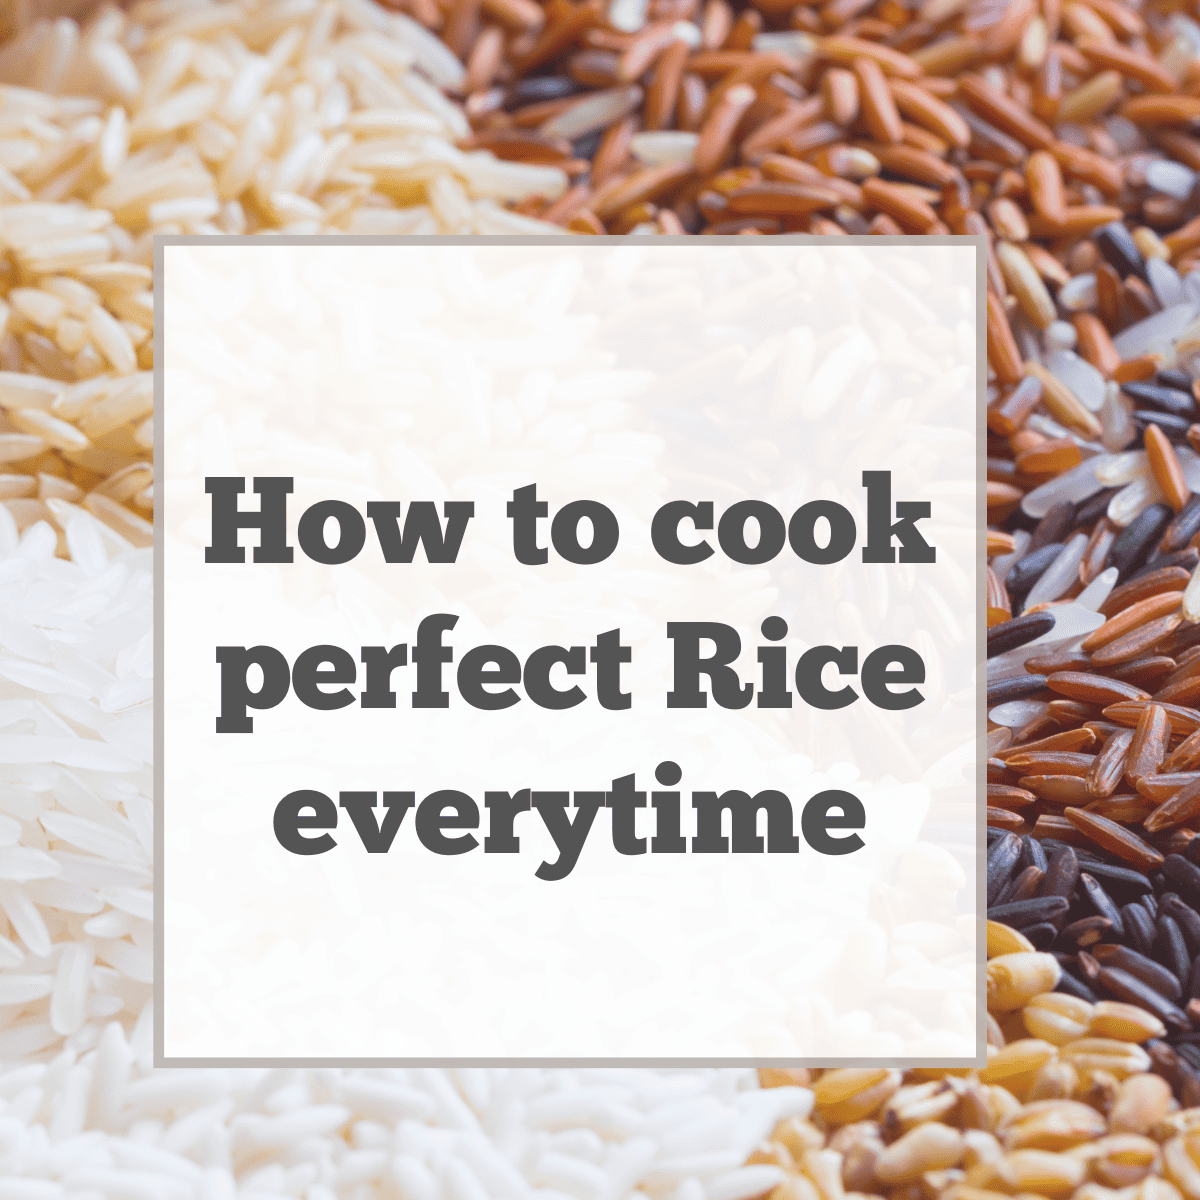 How to cook perfect Rice every time